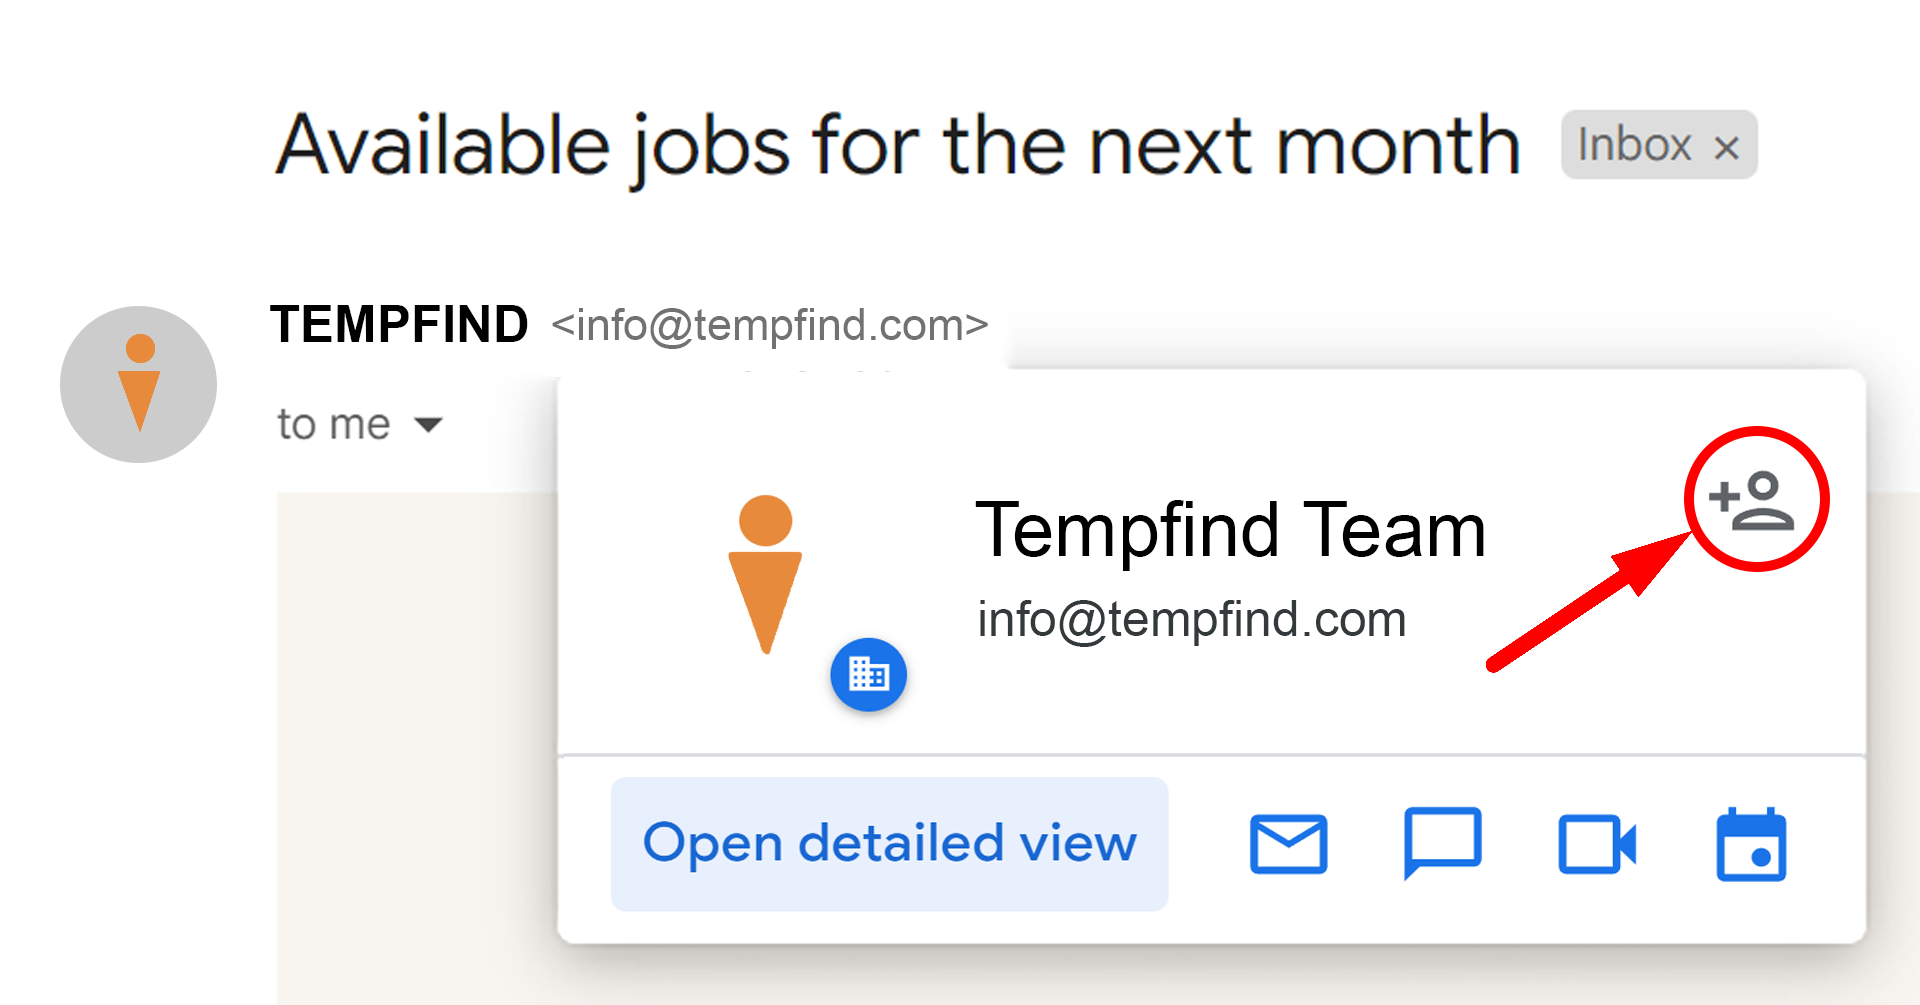 How to add Tempfind to your contacts